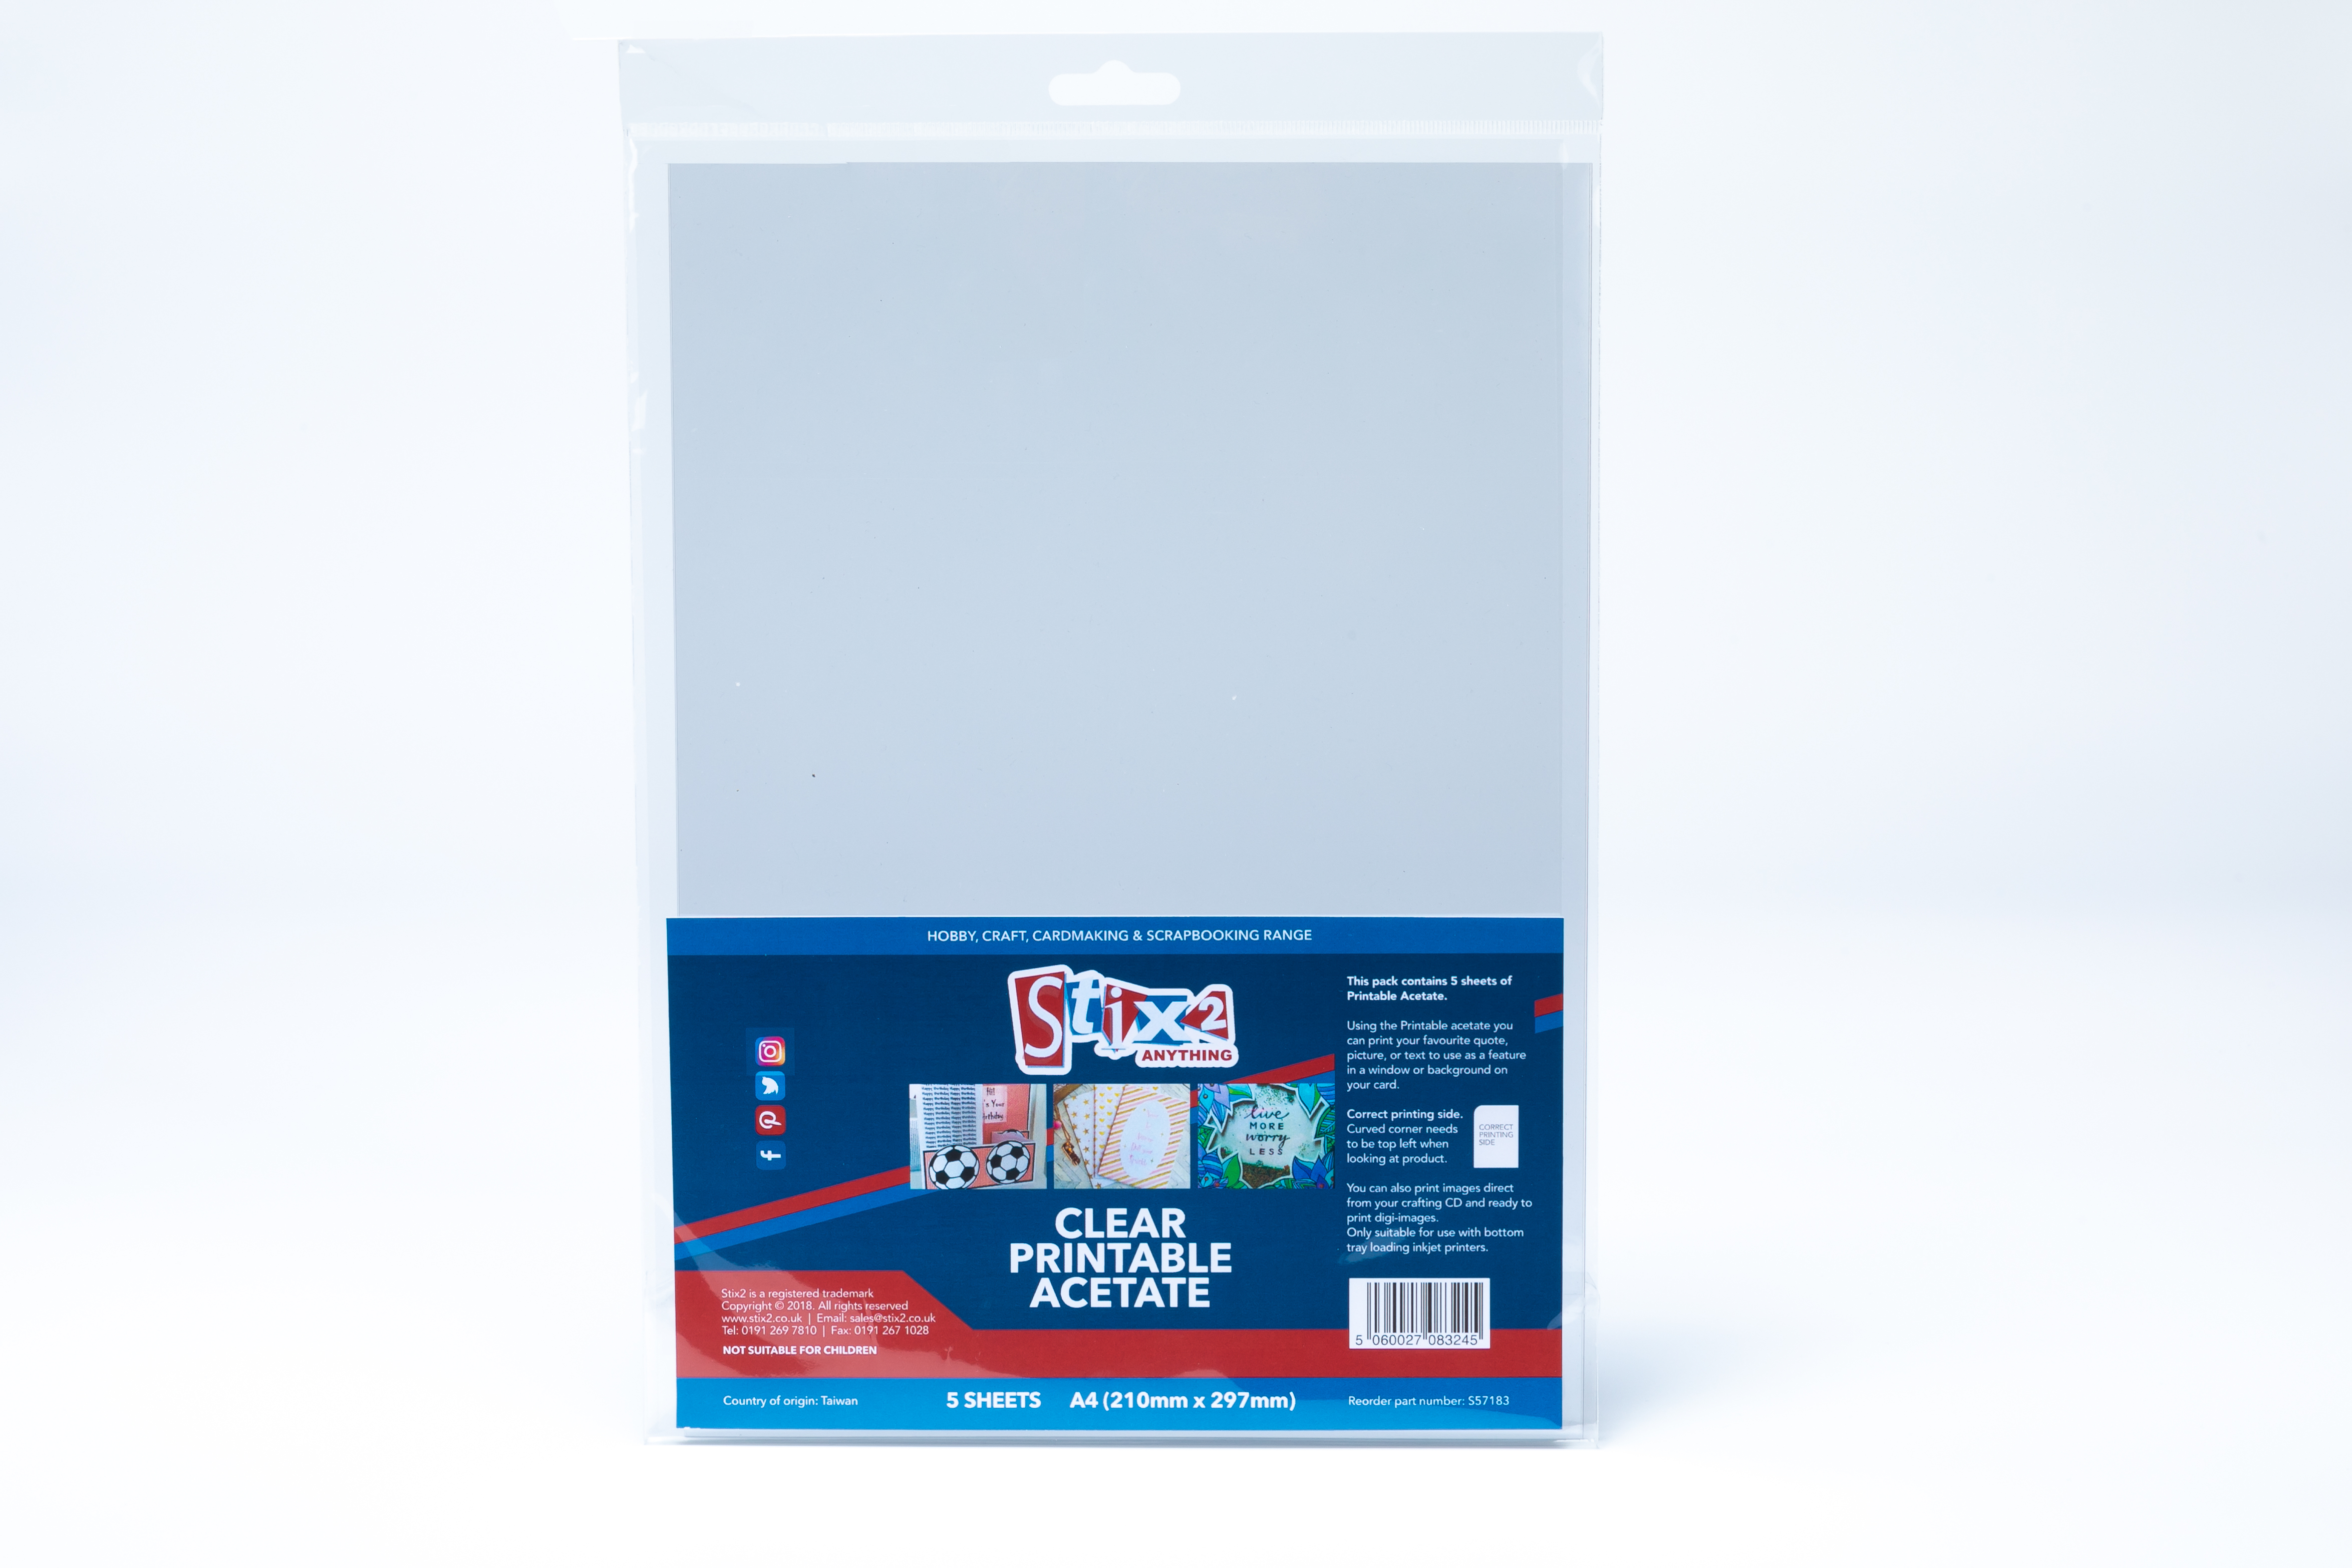 Clear Printable Acetate Sheets (inkjet Printer) 100 Micron thick